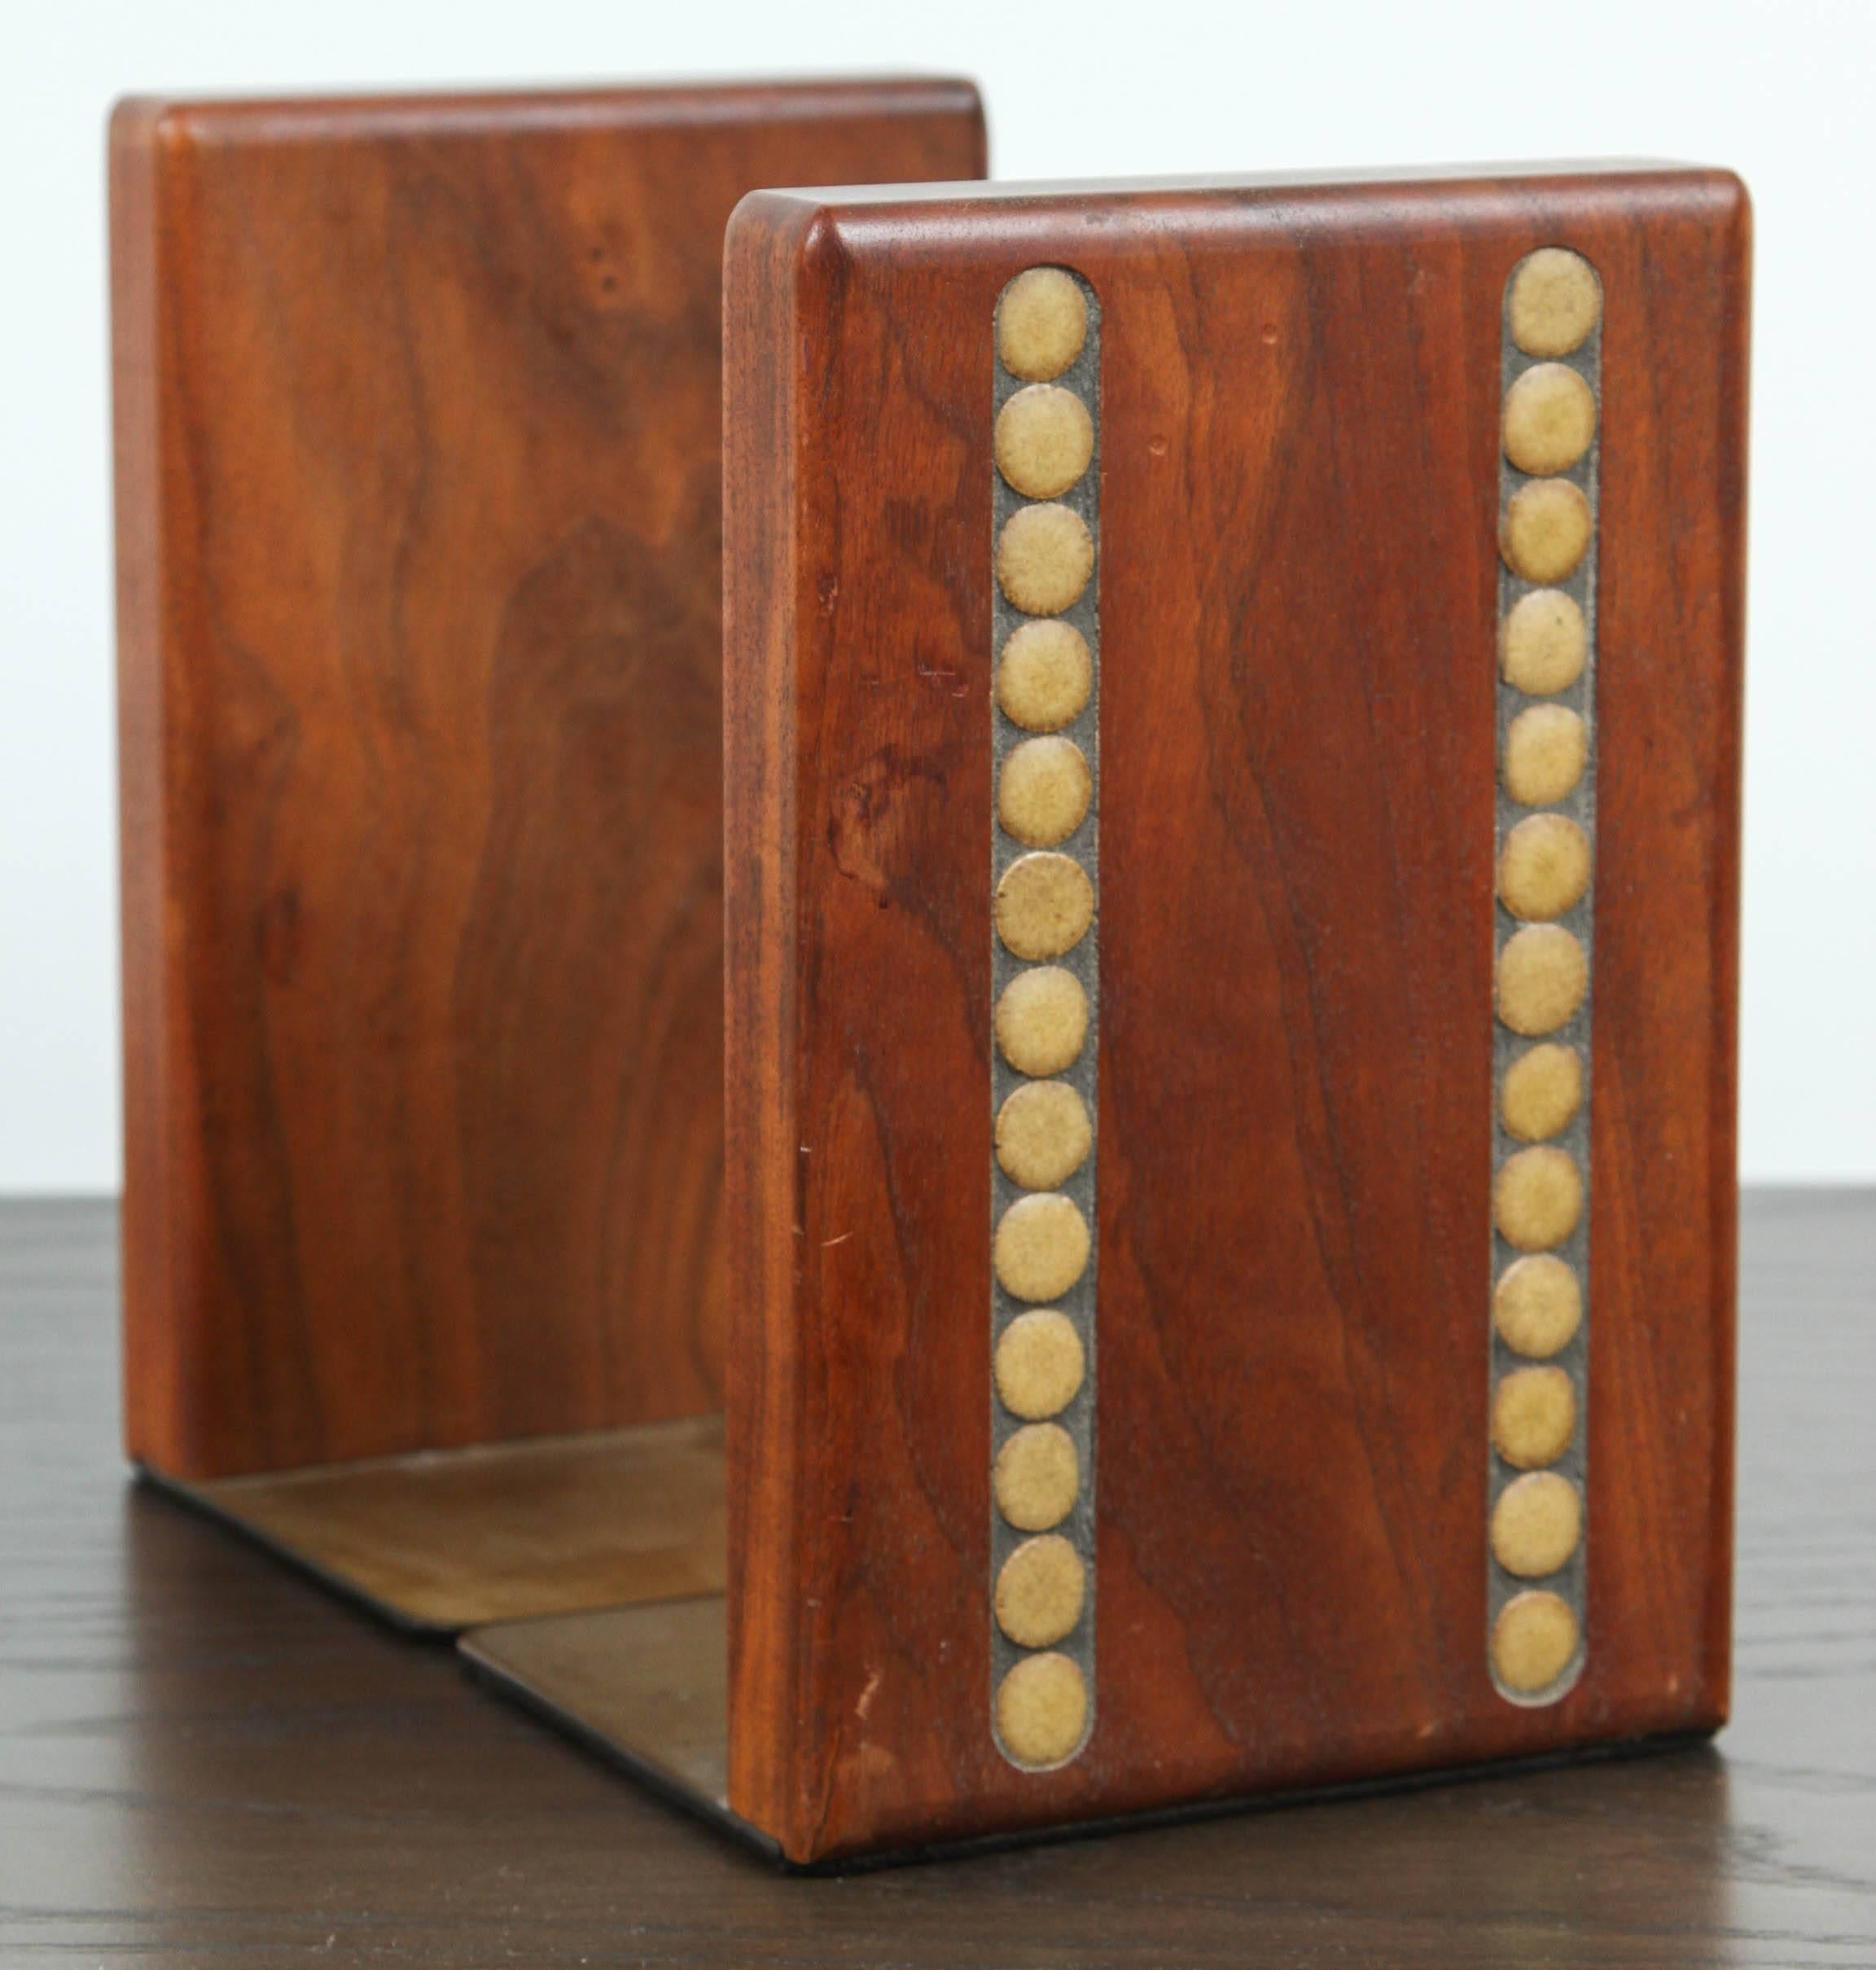 American Teak and Ceramic Bookends by Martz